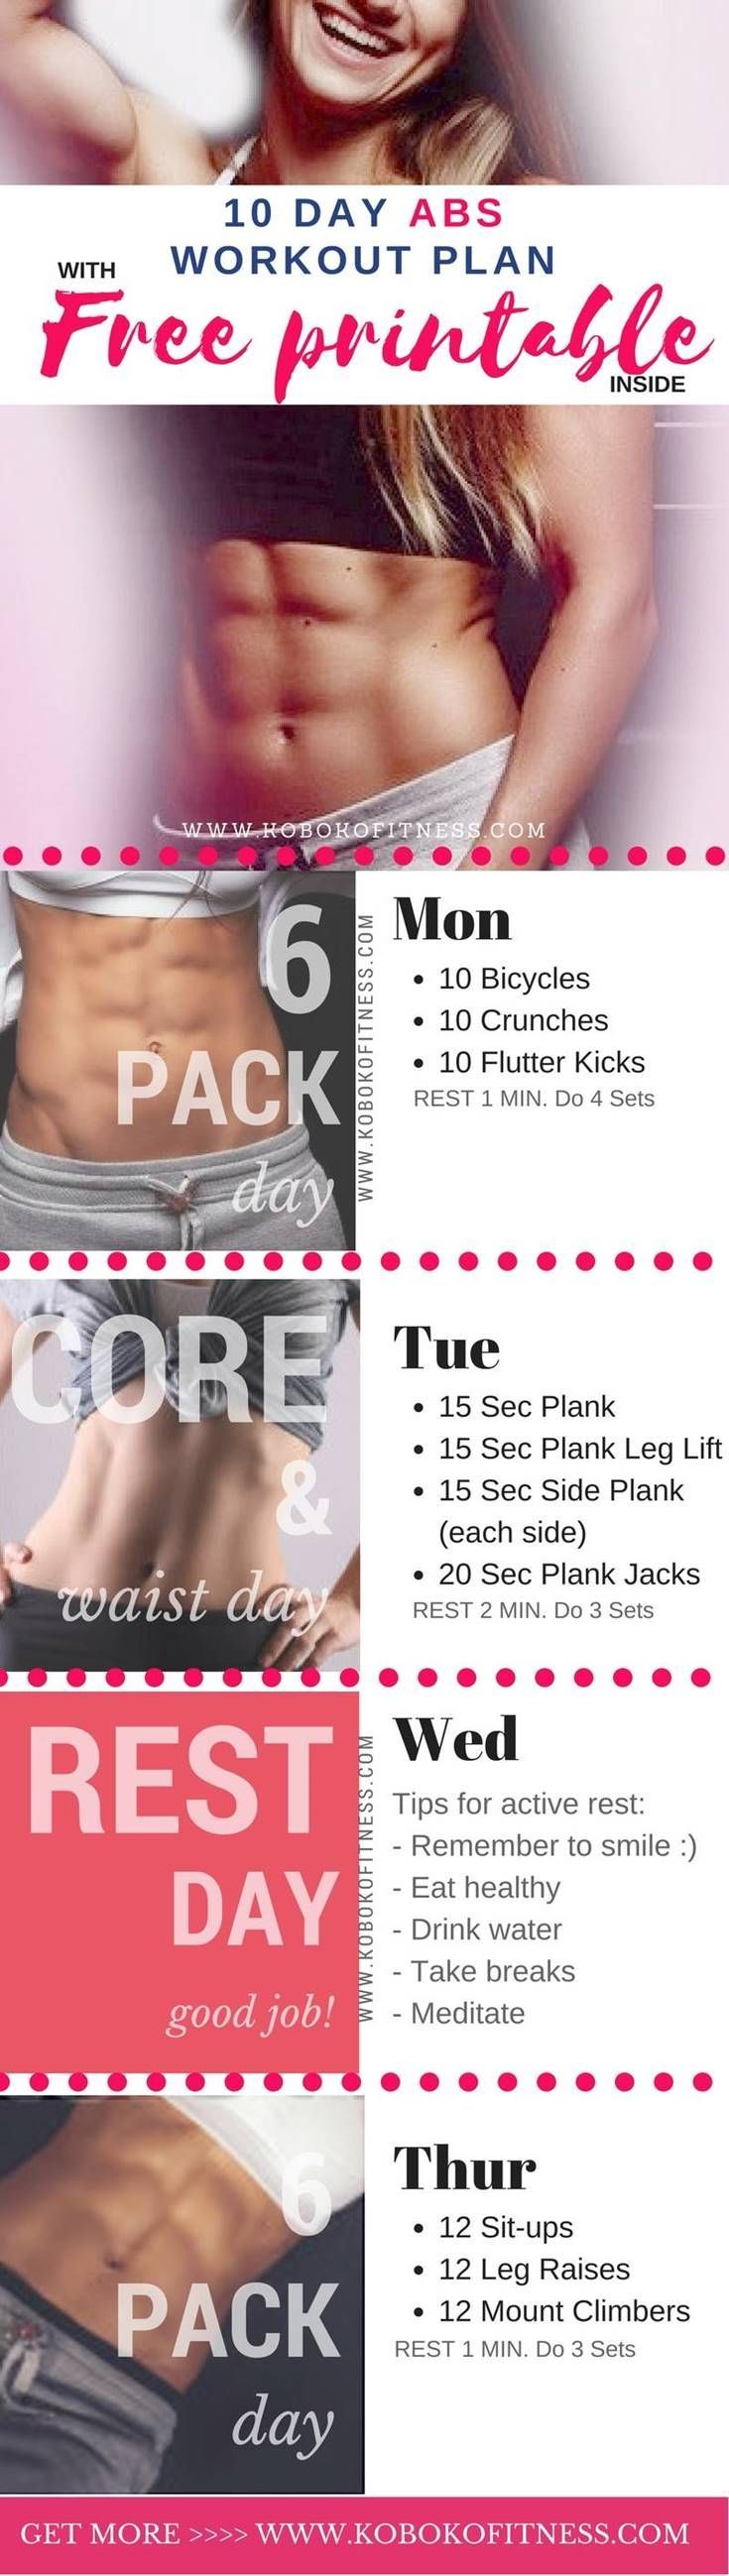 Get this ab workout plan to help get rid of belly fat and get toned abs at home....